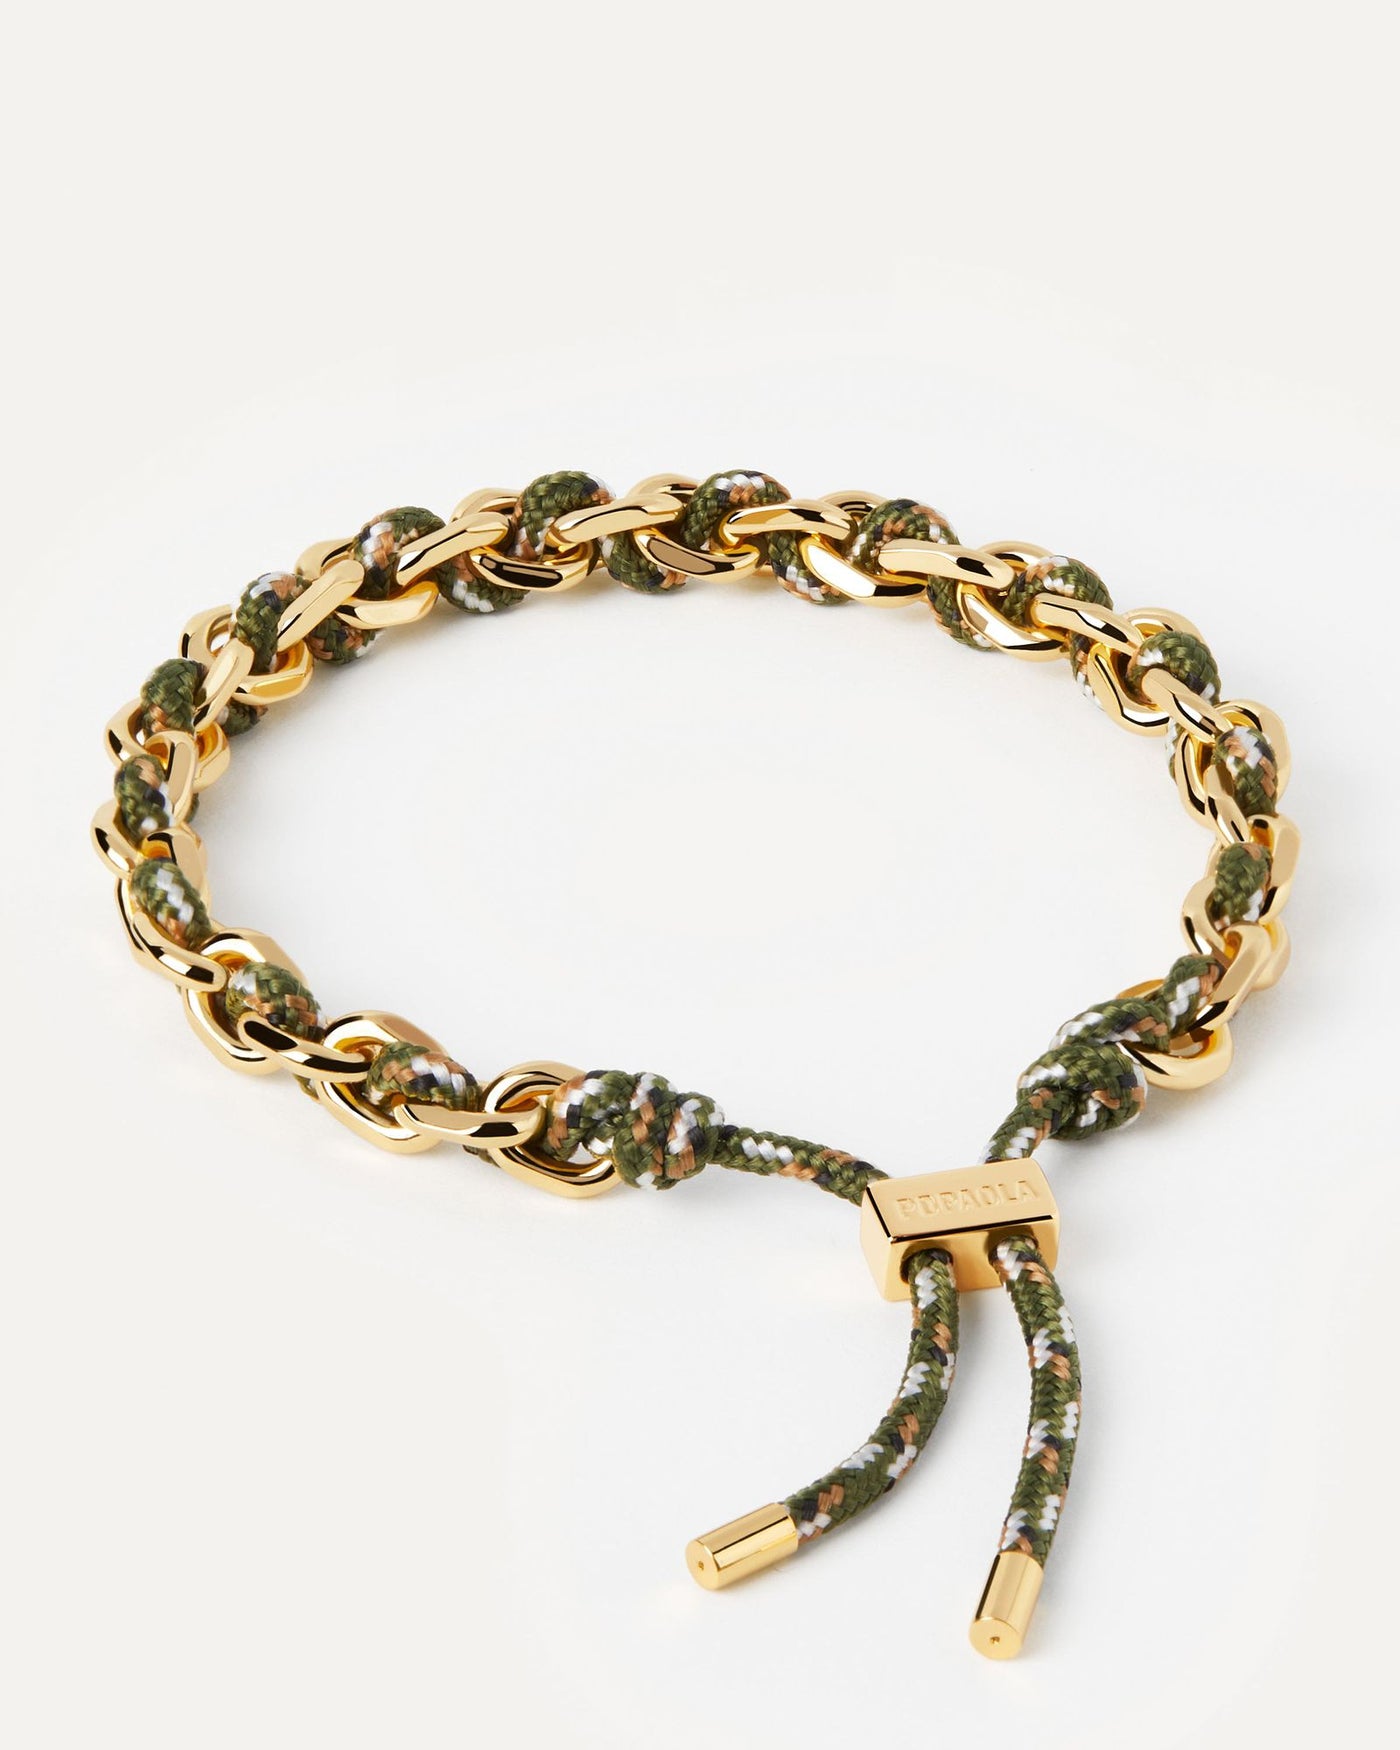 2024 Selection | Cottage Rope and Chain Bracelet. Golden chain bracelet with a forest green rope adjustable sliding clasp. Get the latest arrival from PDPAOLA. Place your order safely and get this Best Seller. Free Shipping.